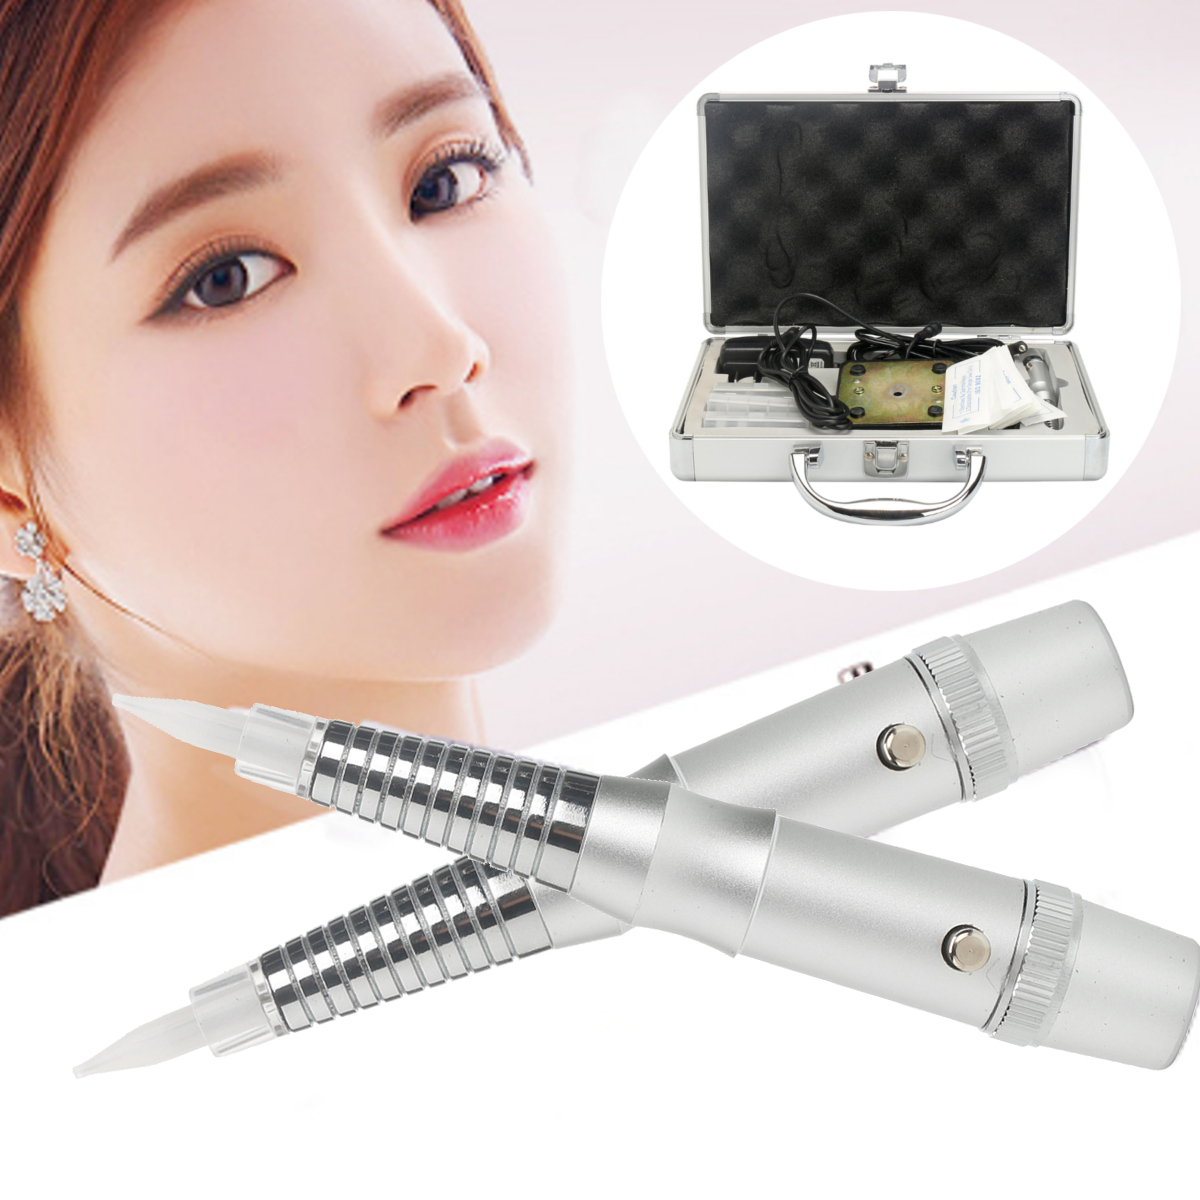 Durable-Tattoo-Machine-Suitable-For-Eyebrow-Liner-Bleach-Lip-Semi-Permanent-Tools-1238279